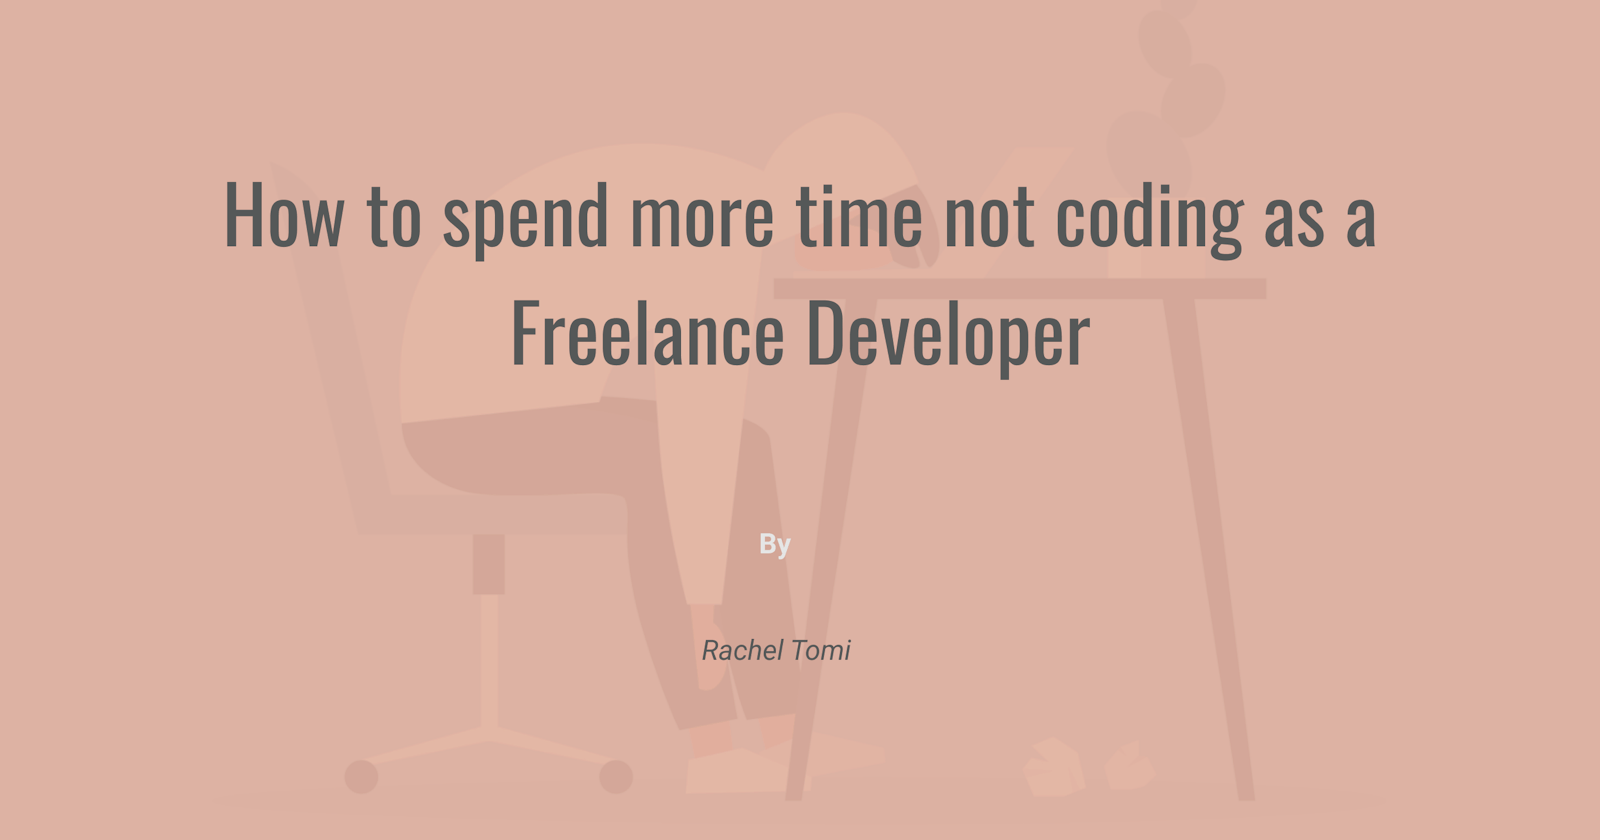 How to spend more time not coding as a Freelance Developer